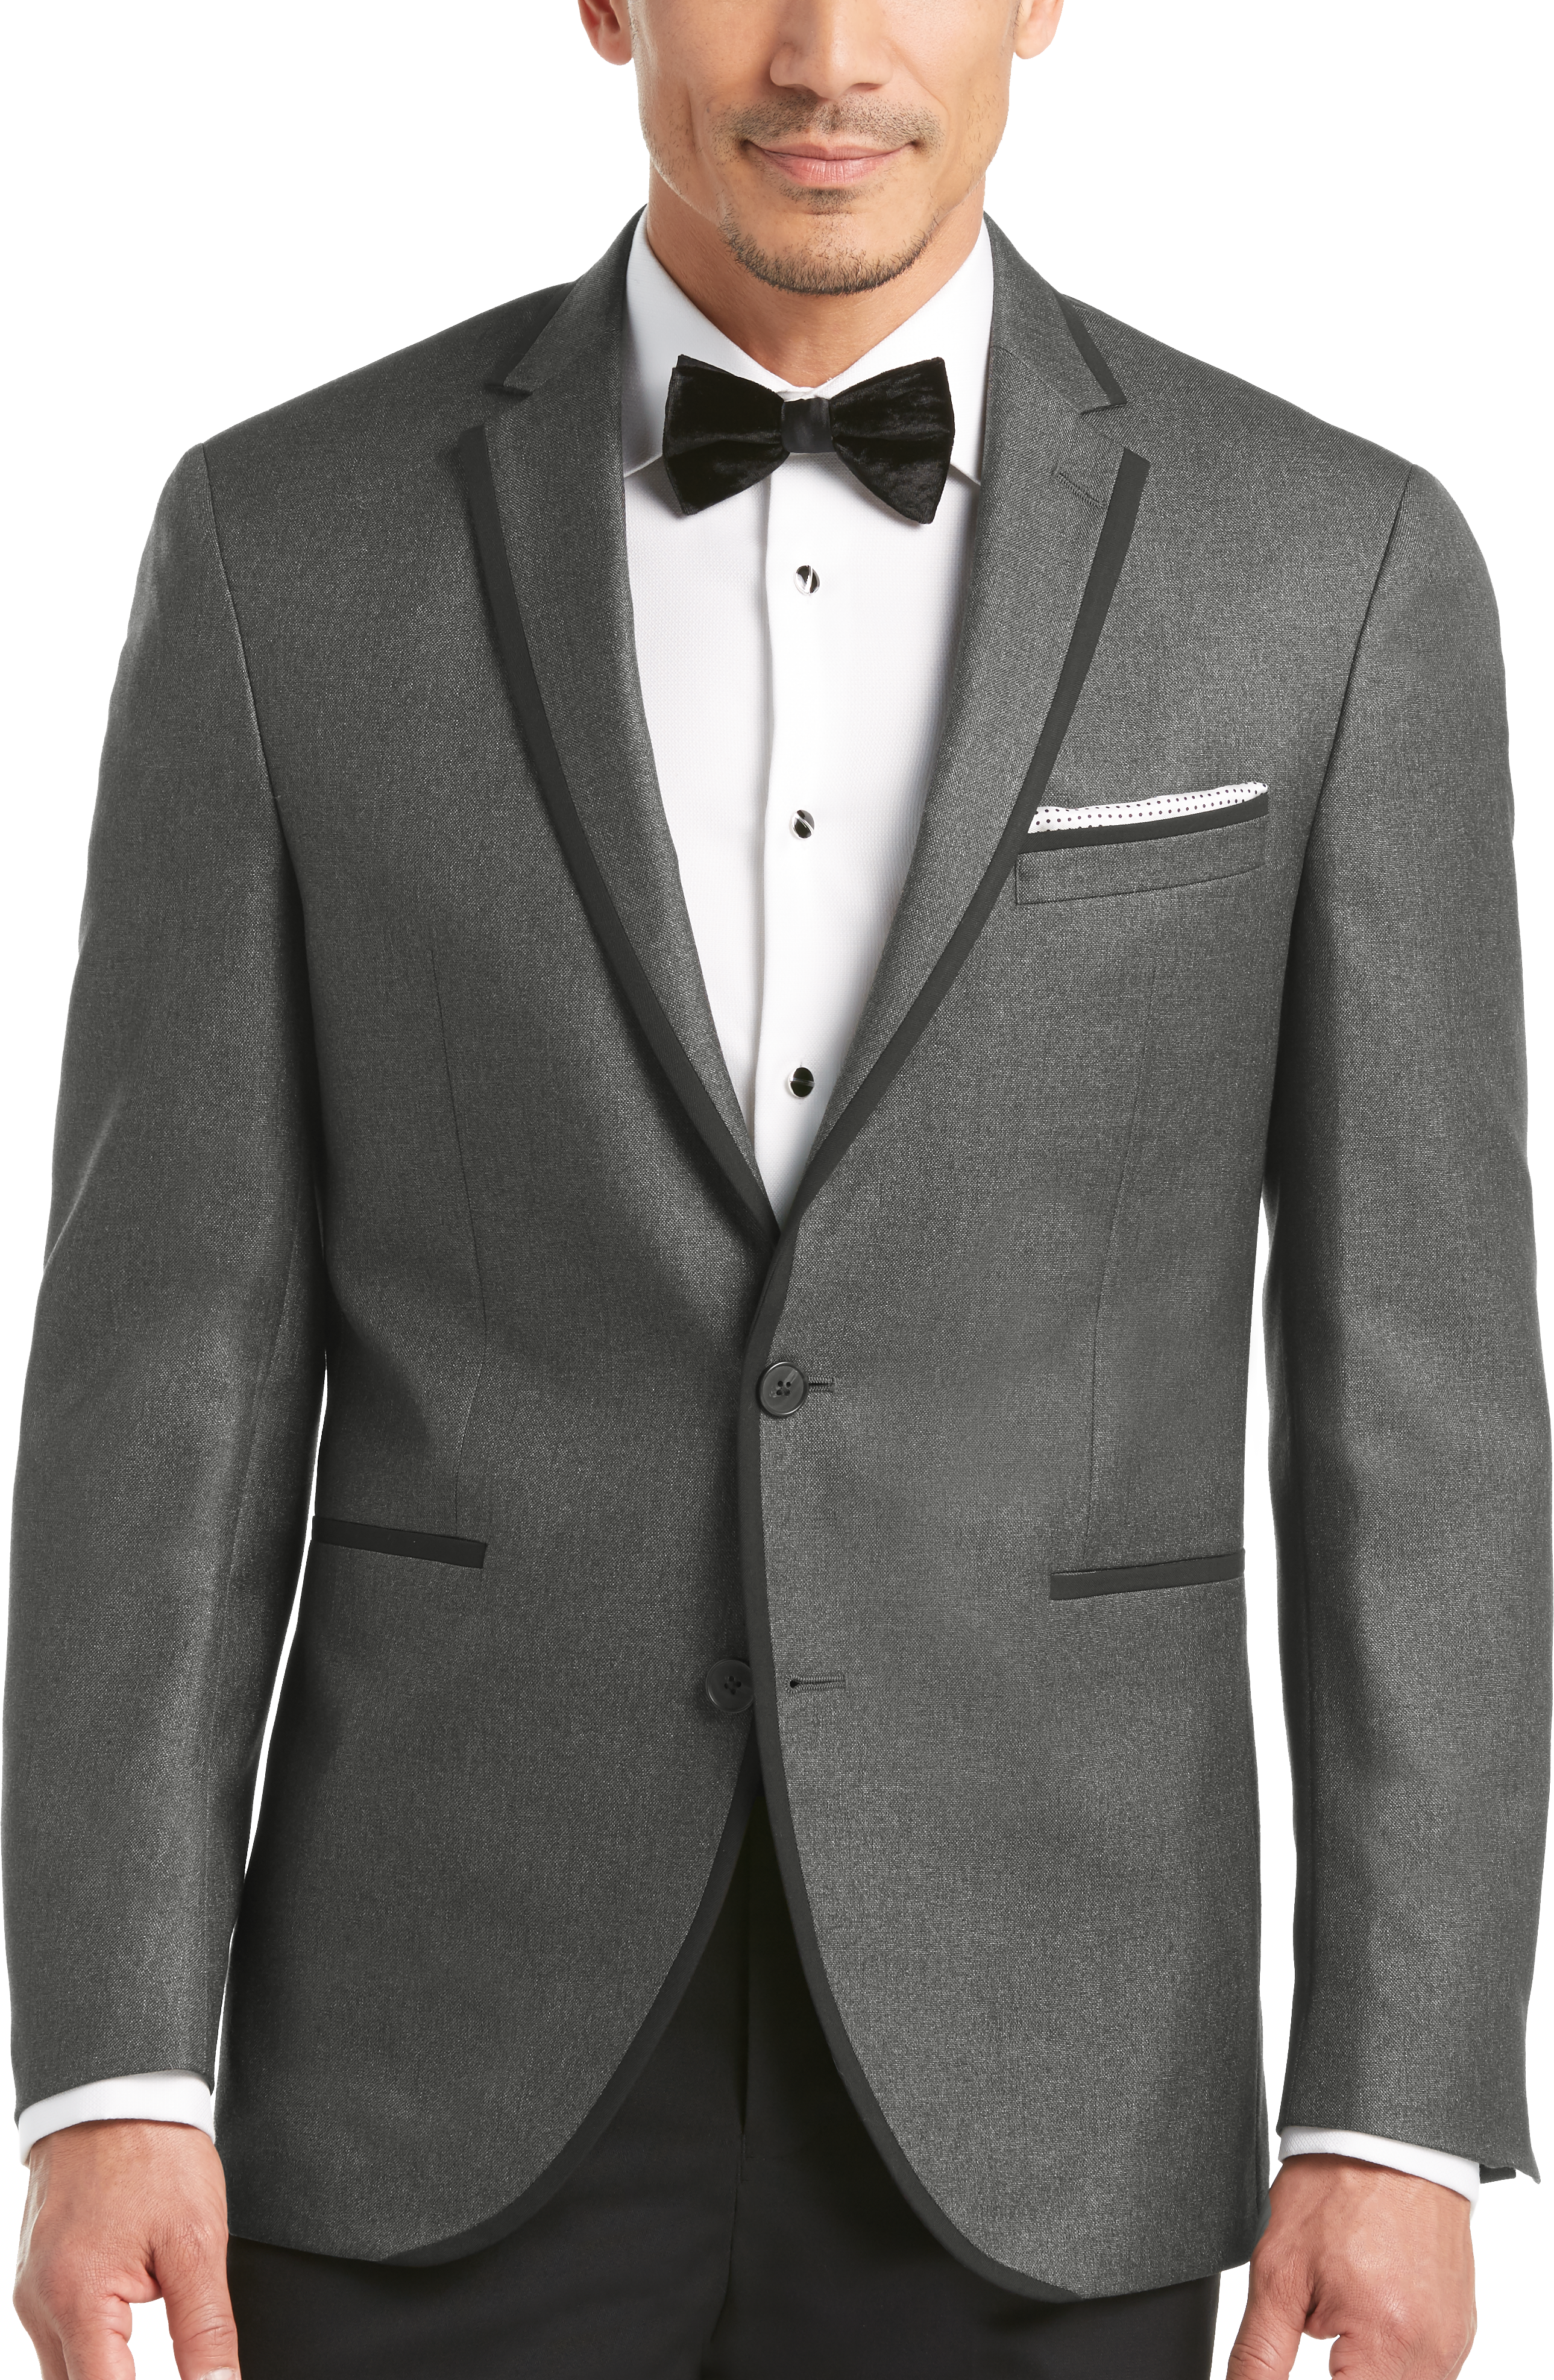 Kenneth Cole New York Charcoal Slim Fit Dinner Jacket - Men's Tuxedos ...